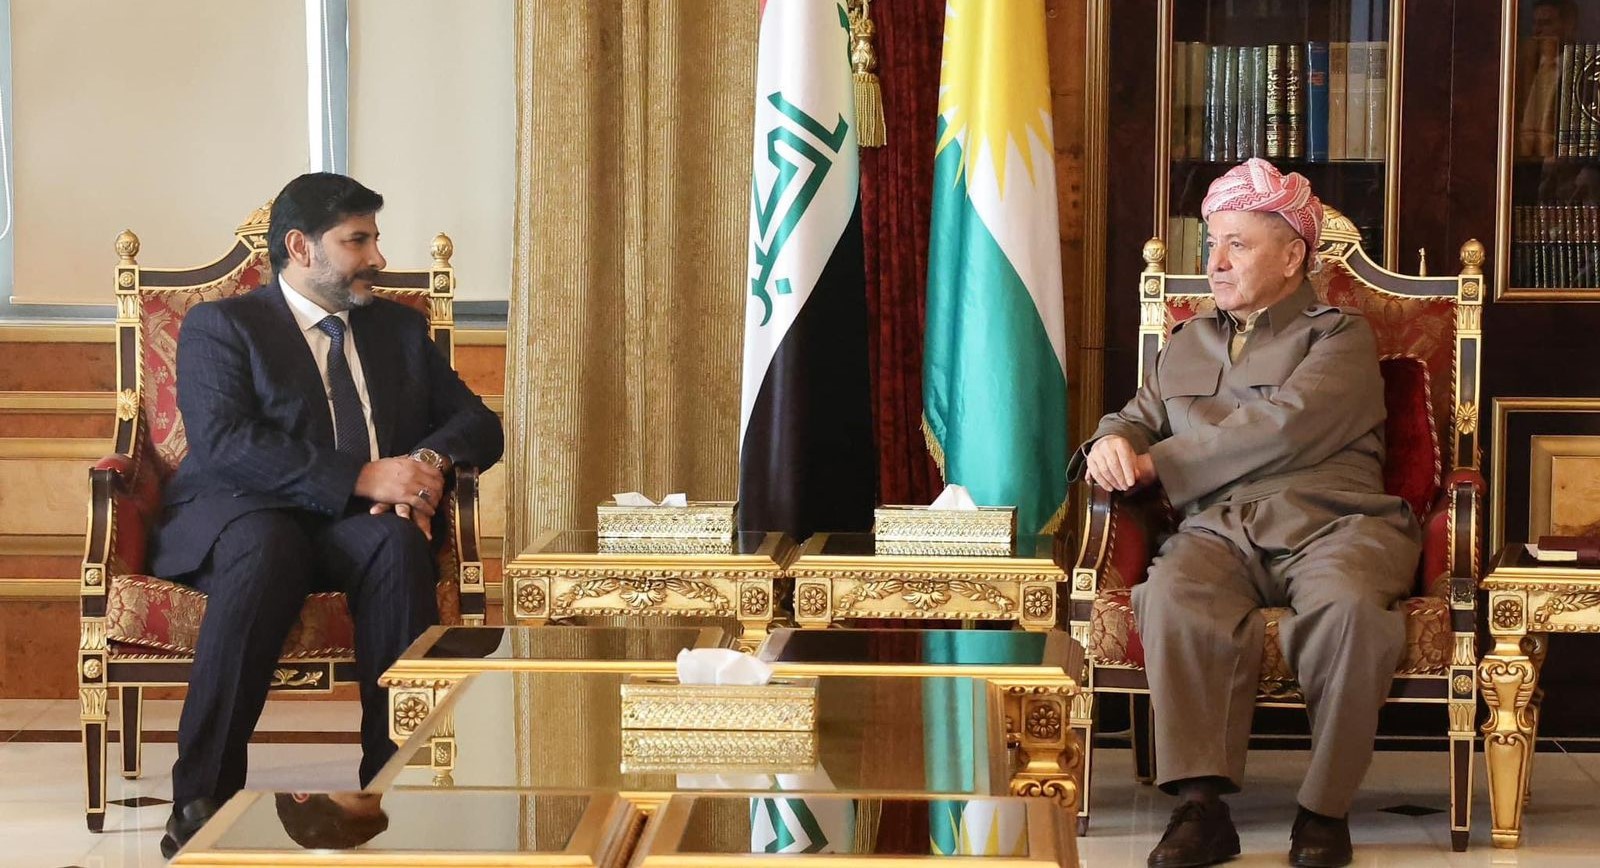 Leader Barzani stresses importance of political cooperation in meeting with Islamic Dawa Party